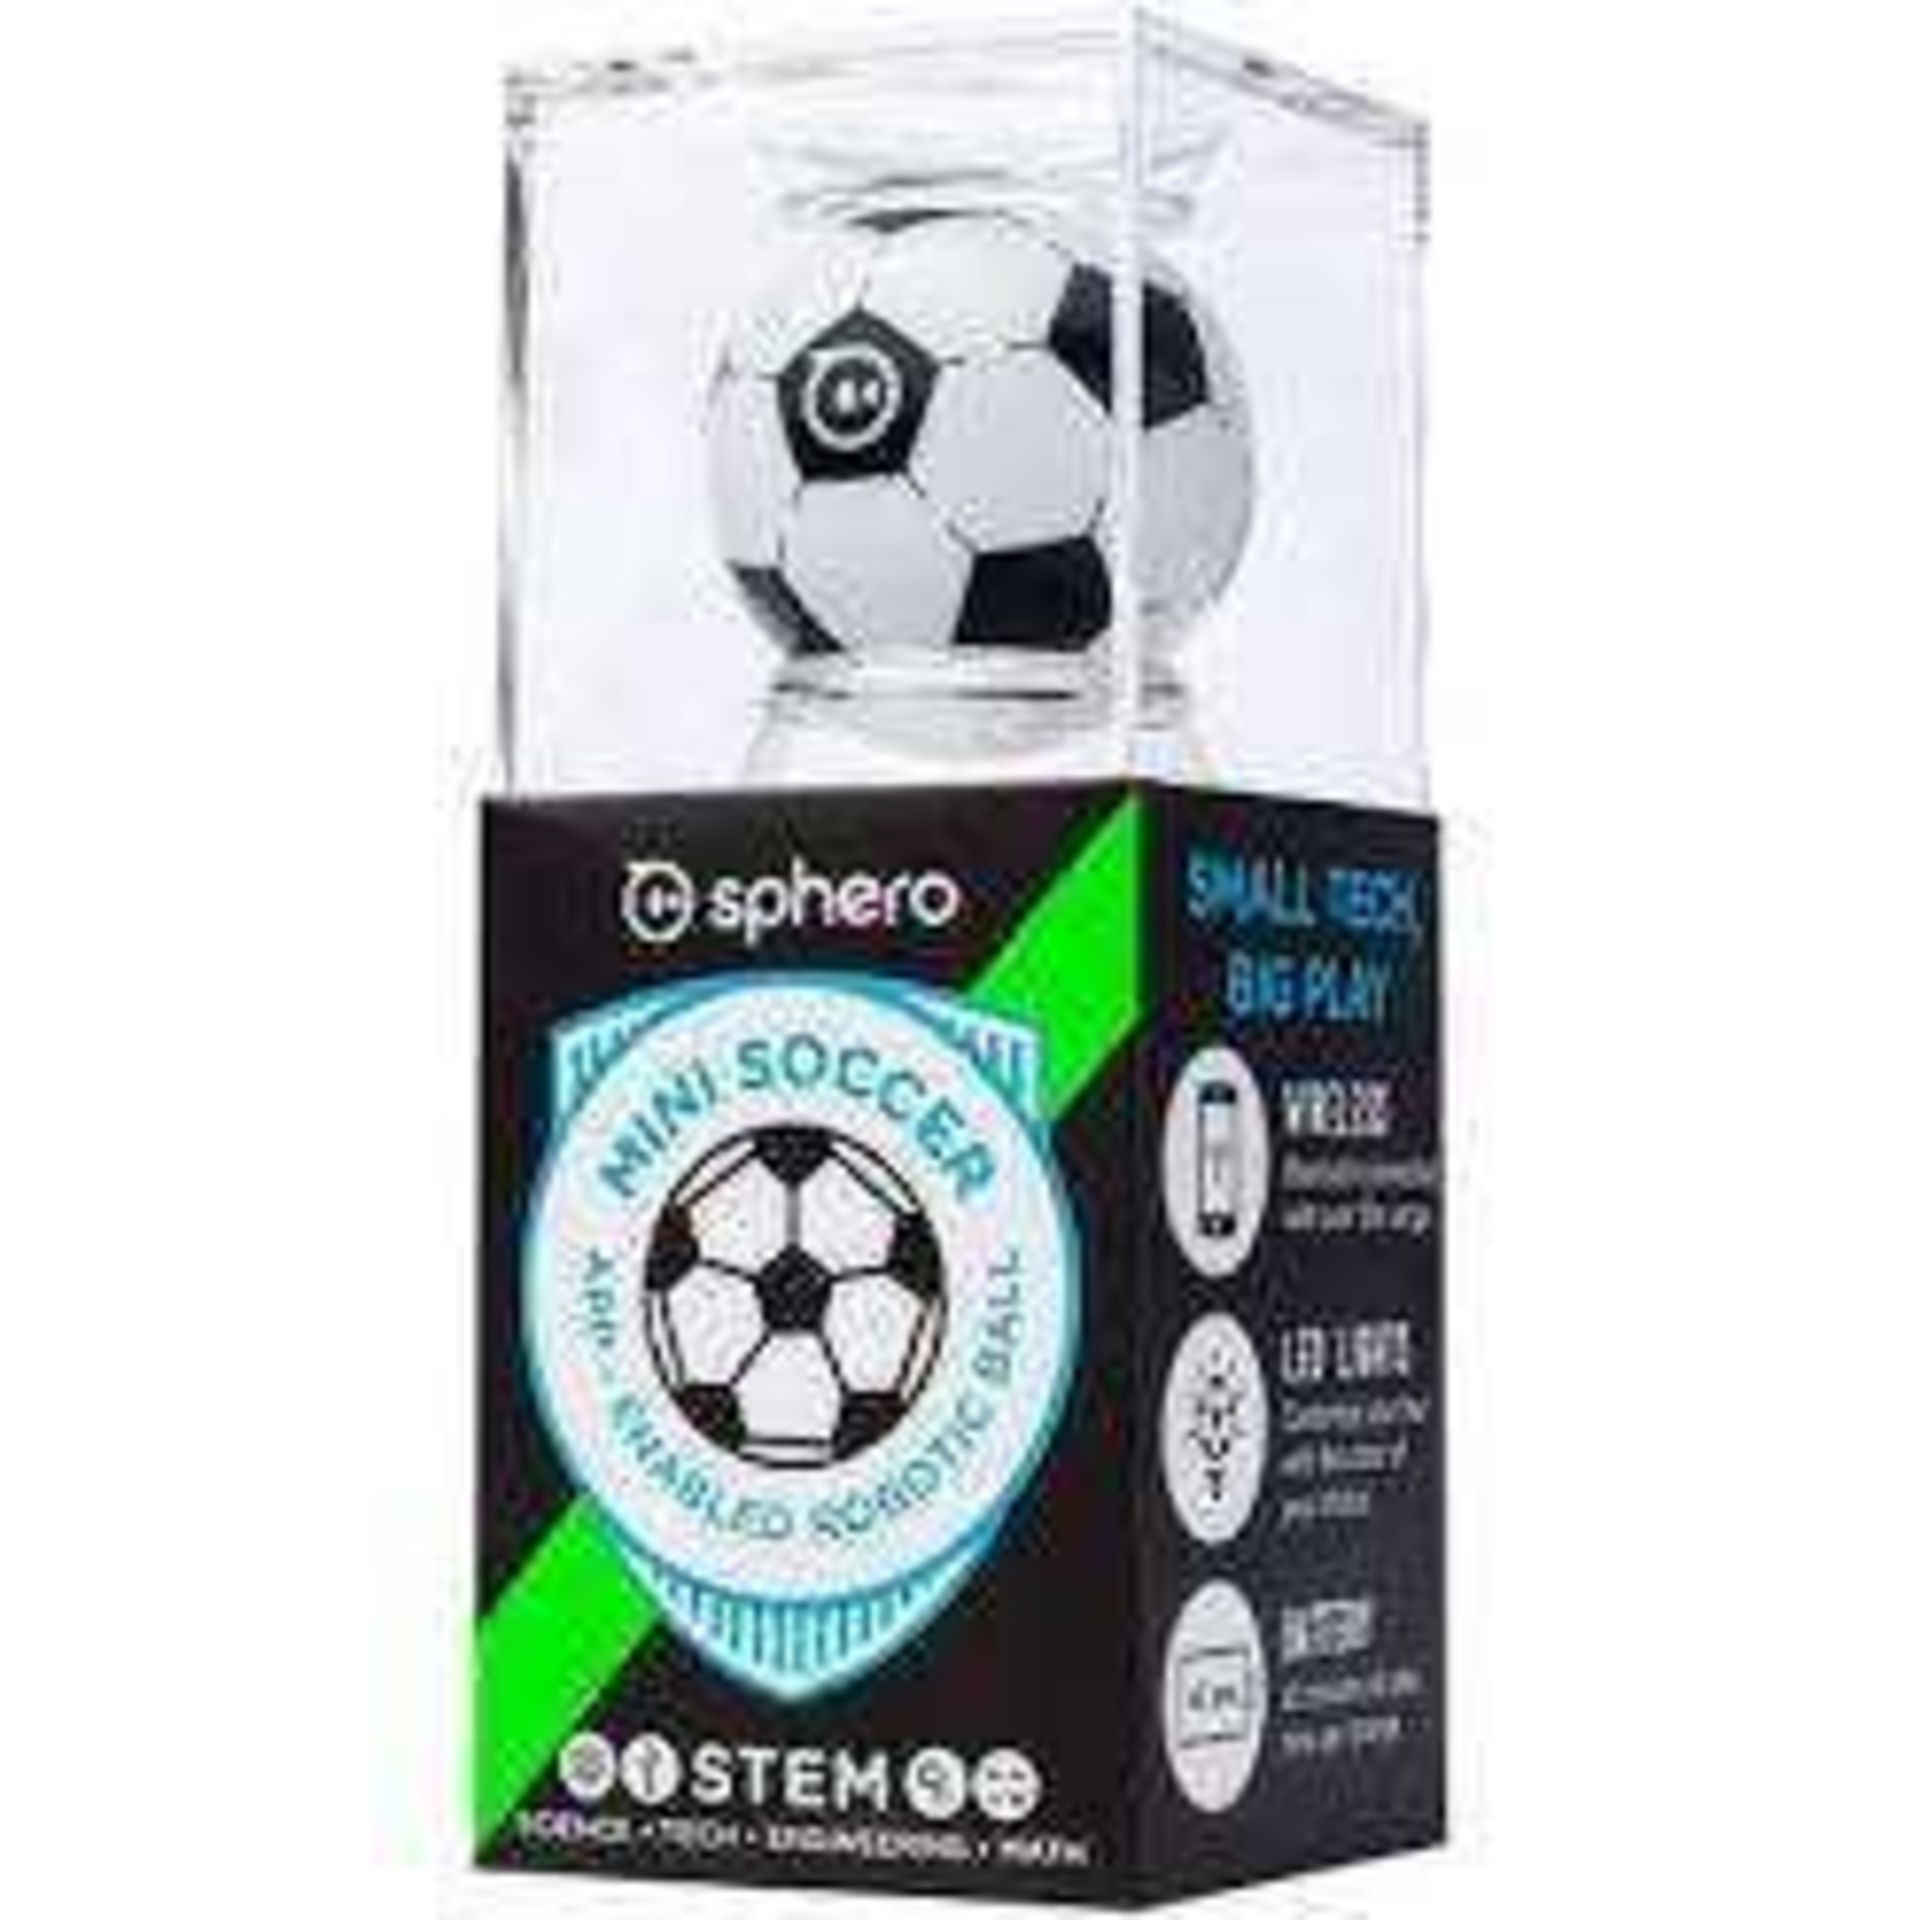 Combined RRP £100 Lot To Contain 2 Boxed Sphero Mini Soccer App Enabled Robotic Ball